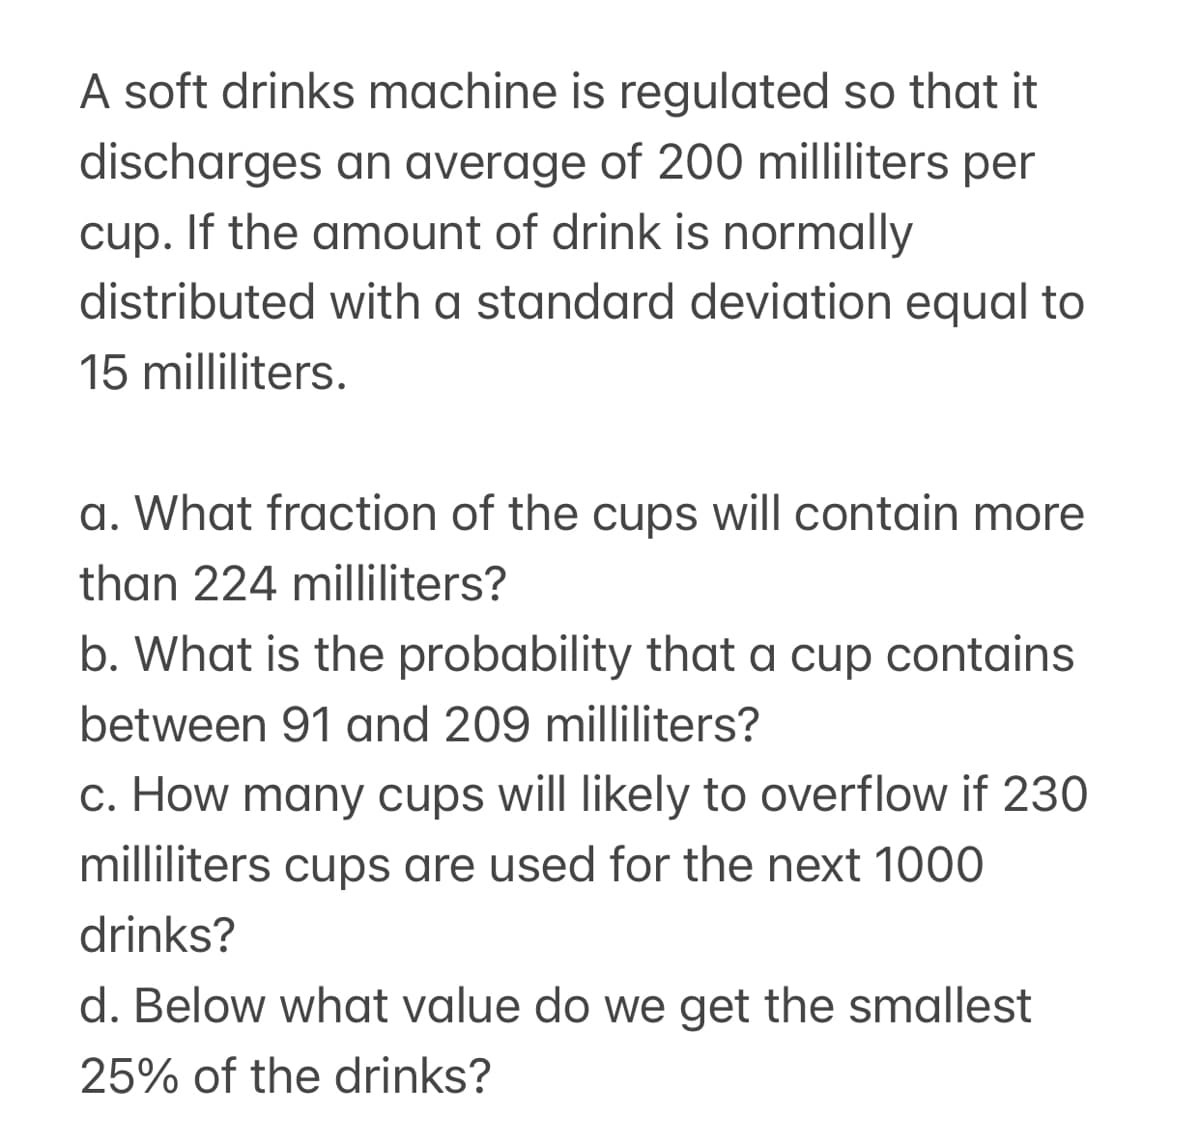 A soft drinks machine is regulated so that it
discharges an average of 200 milliliters per
cup. If the amount of drink is normally
distributed with a standard deviation equal to
15 milliliters.
a. What fraction of the cups will contain more
than 224 milliliters?
b. What is the probability that a cup contains
between 91 and 209 milliliters?
c. How many cups will likely to overflow if 230
milliliters cups are used for the next 1000
drinks?
d. Below what value do we get the smallest
25% of the drinks?